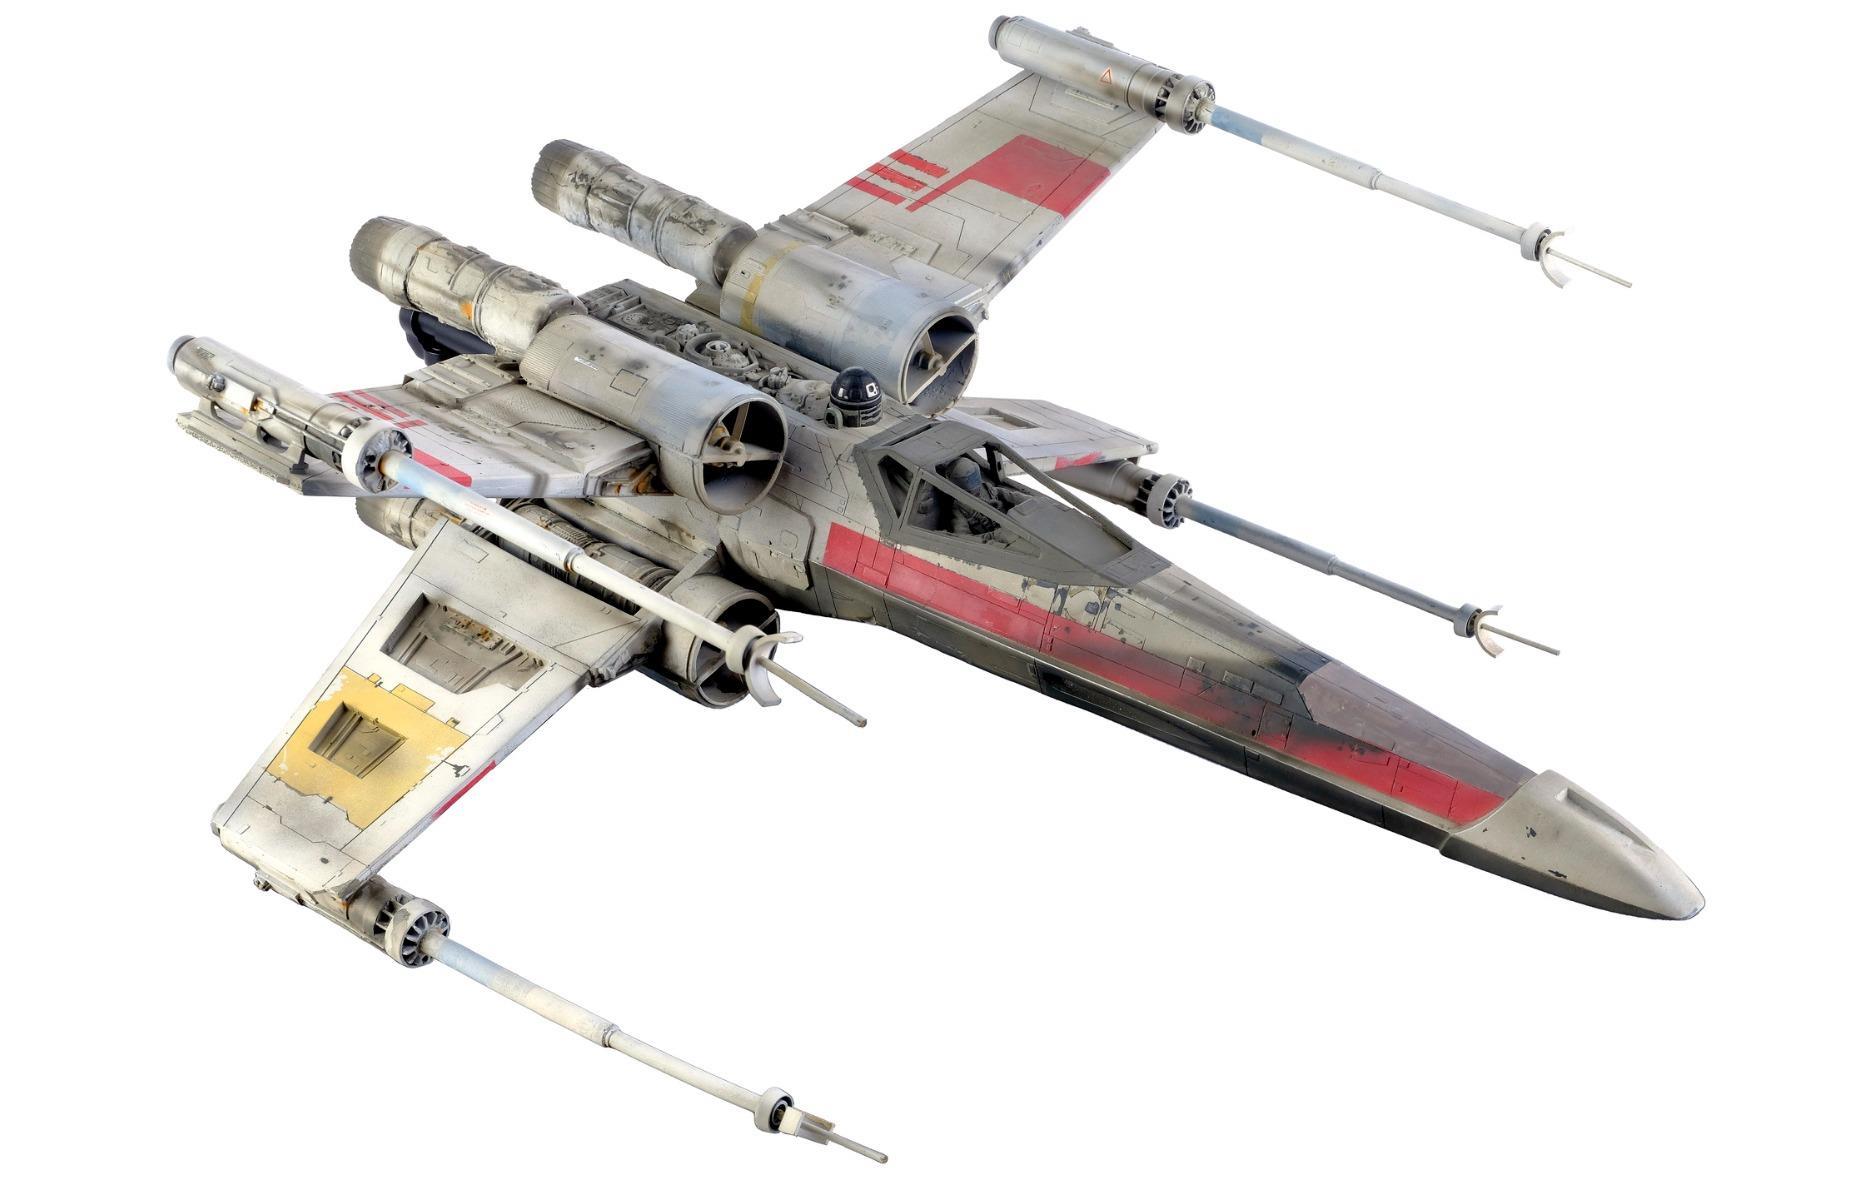 Star Wars: Episode IV A New Hope (1977) X-Wing: $2.4 million (£2m)